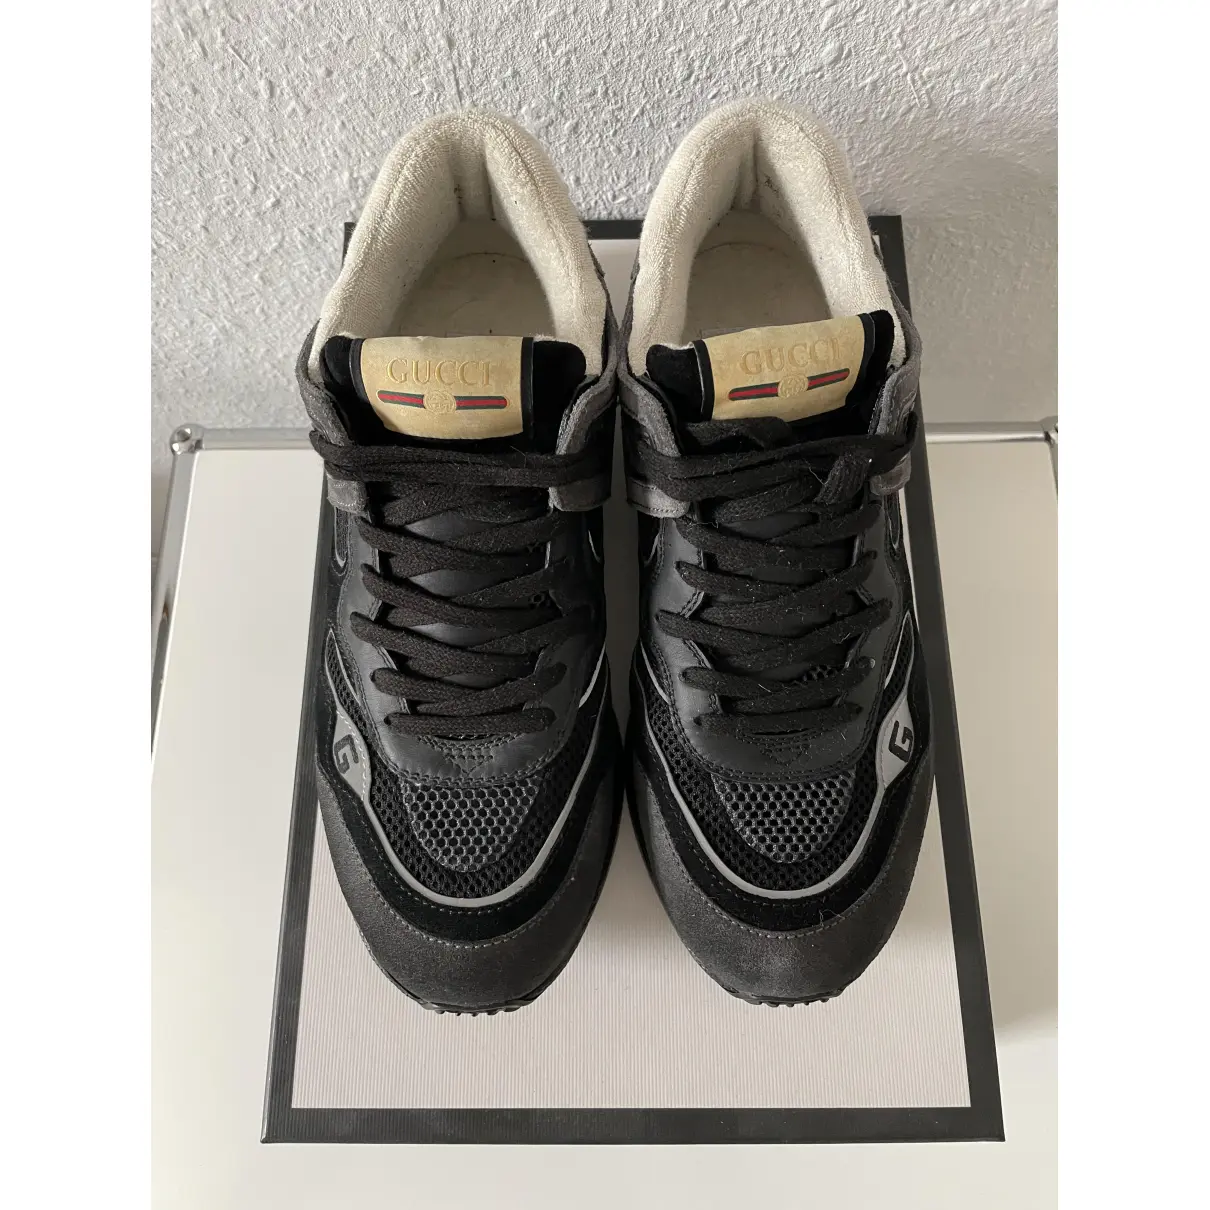 Buy Gucci Ultrapace leather low trainers online